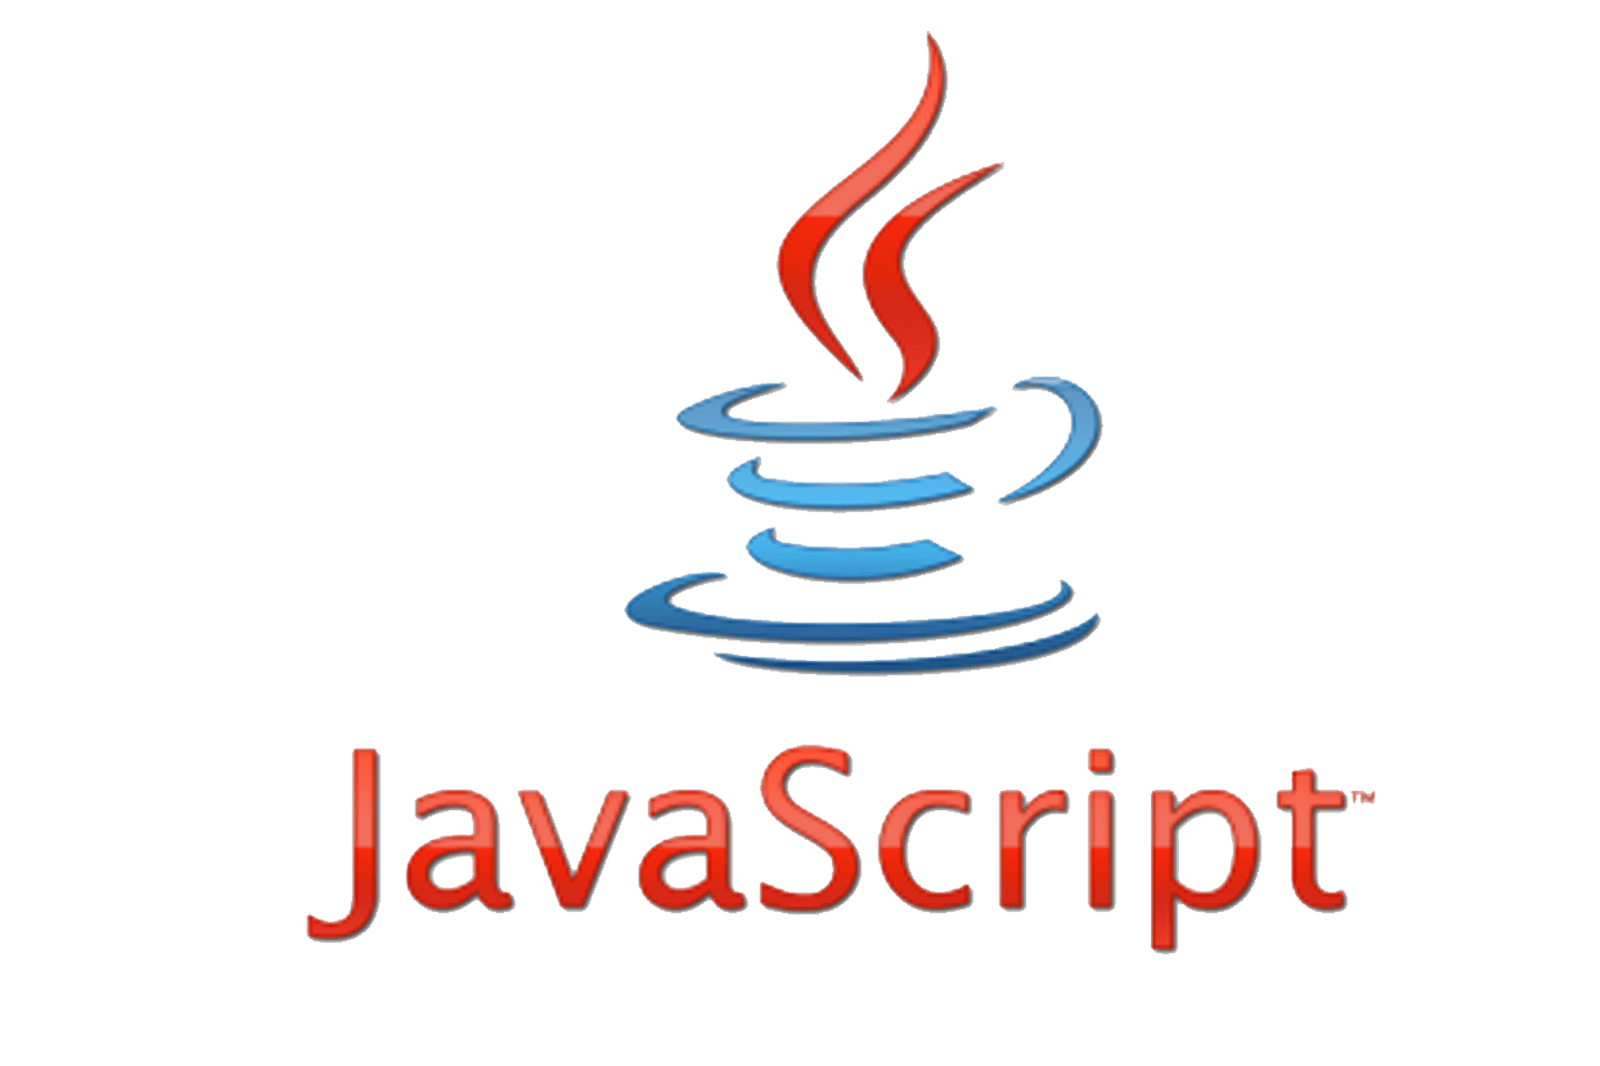 JavaScript Logo - Stanford just abandoned Java in favor of JavaScript for its intro CS